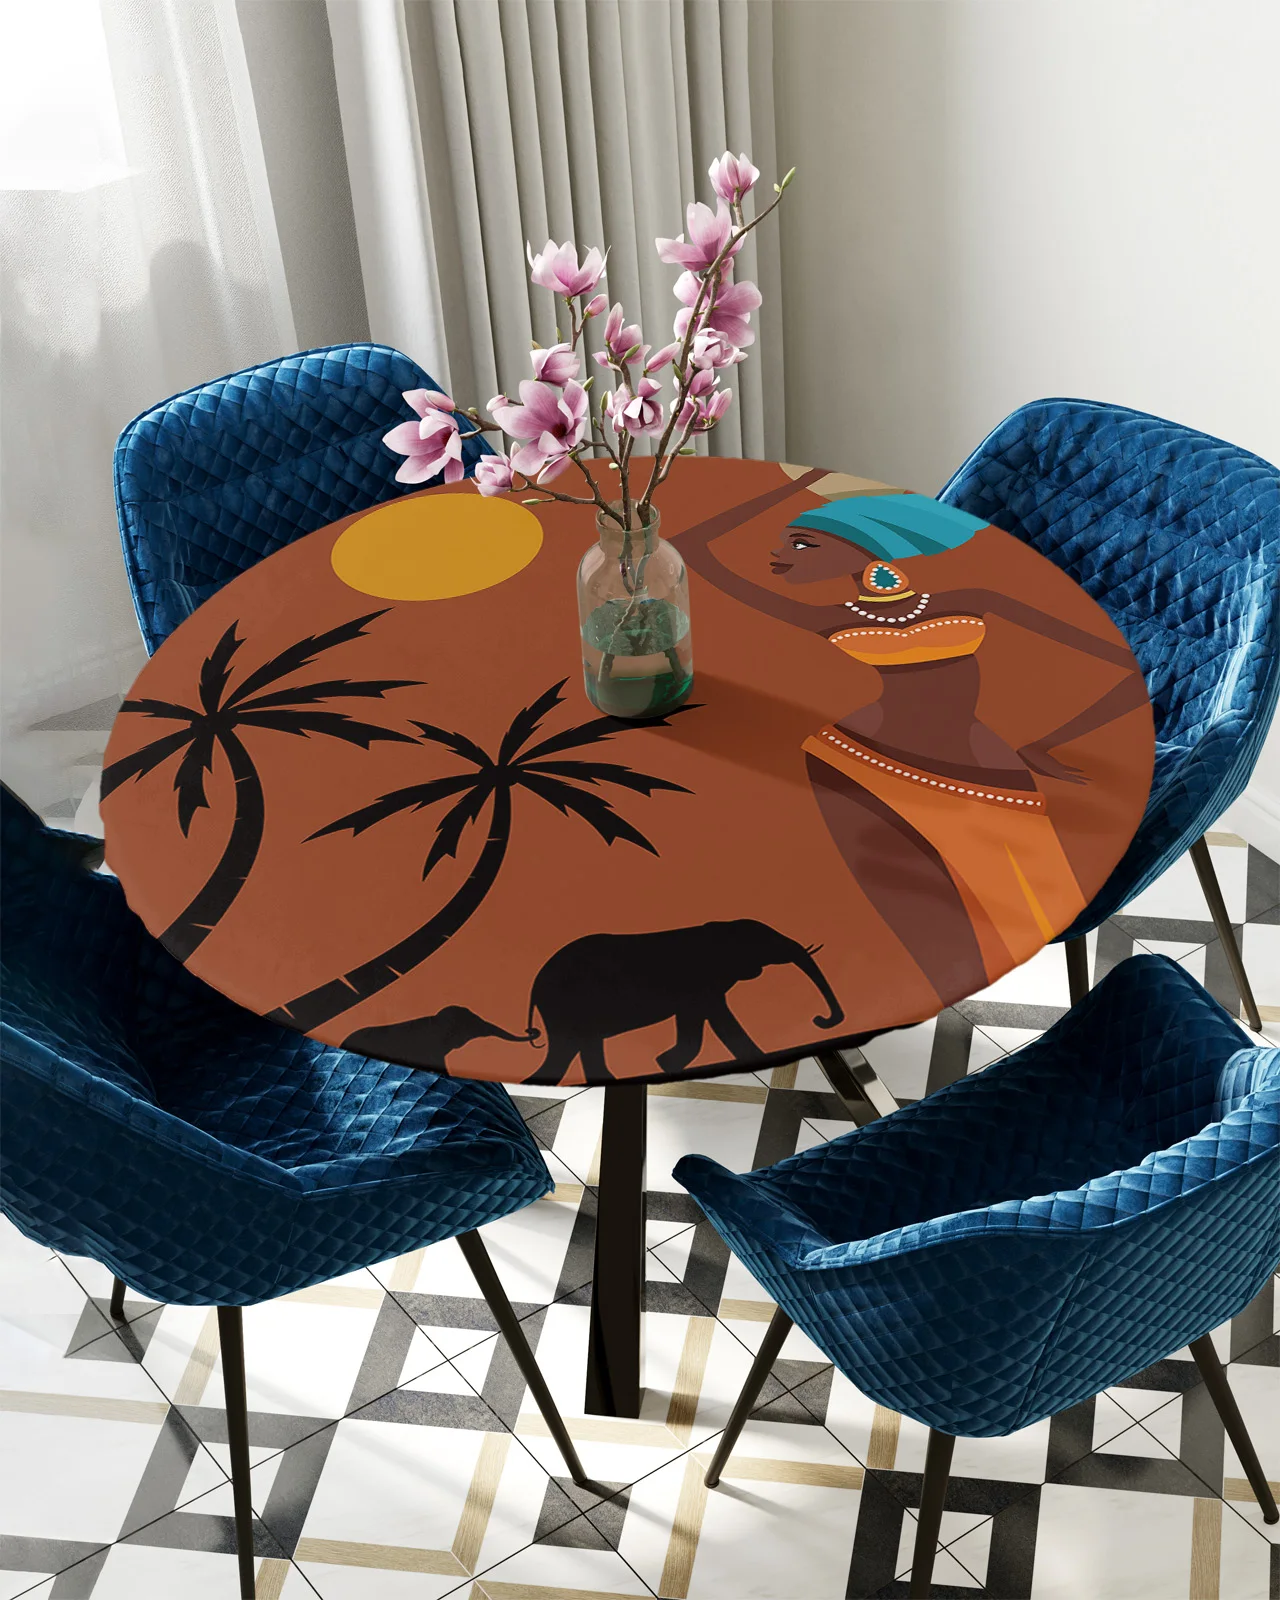 

African Women Sunset Landscape Elephant Round Rectangle Waterproof Elastic Tablecloth Home Kitchen Dining Room Table Cloth Cover